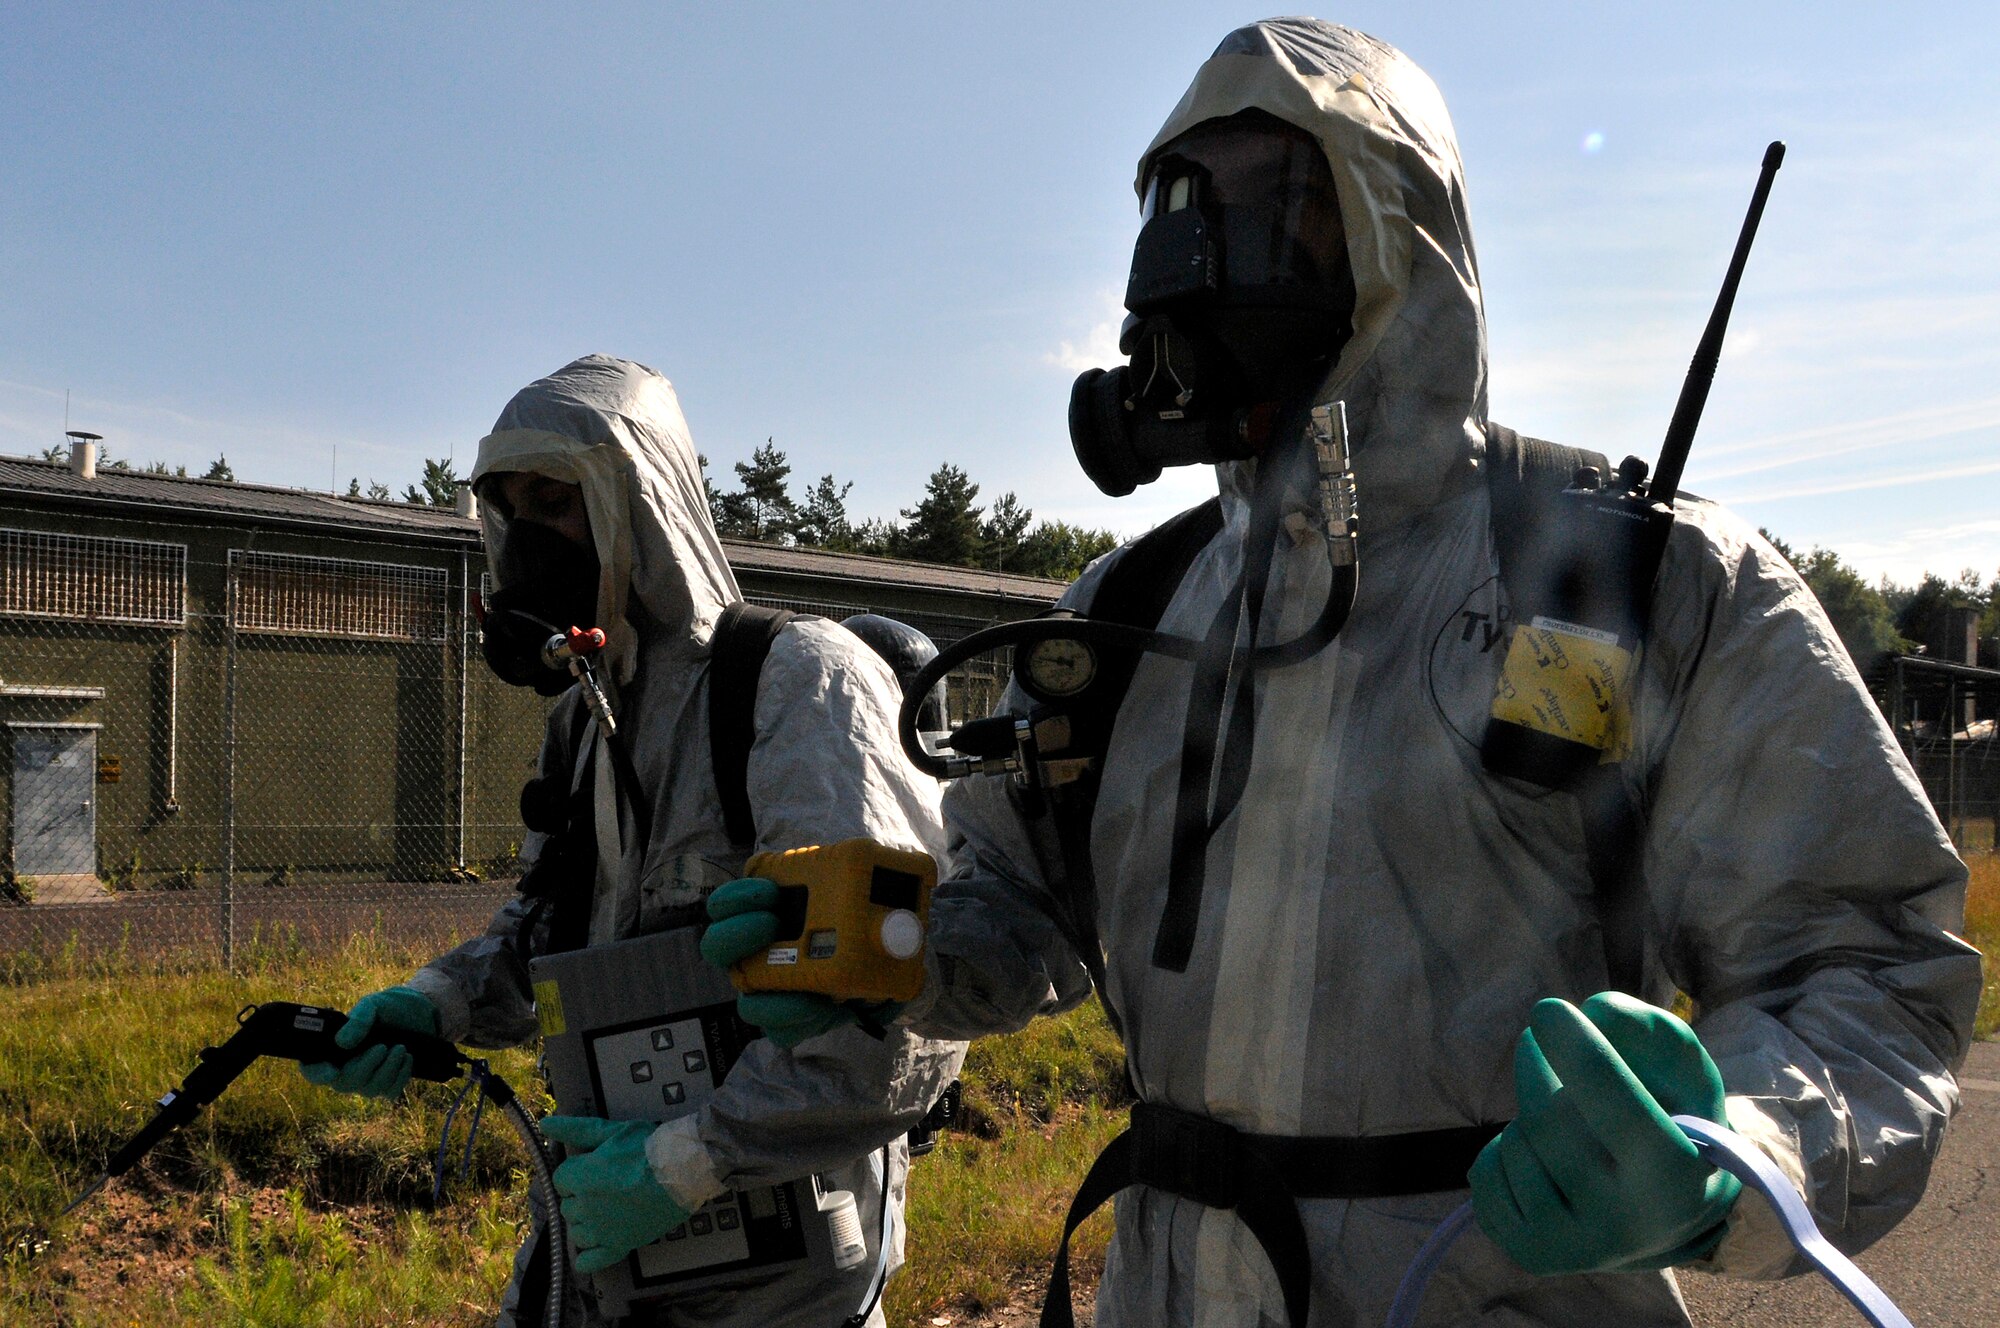 U.S. Air Force Airman 1st Class Mathew Kindoll, 48th Civil Engineer Squadron, and Staff Sgt. Christopher McFefries, 100th Civil Engineer Squadron, take a challenge in Level A suits during the 2009 Chemical, Biological, Radiological, and Nuclear Challenge at Ramstein Air Base, Germany, June 22, 2009. The CBRN Challenge consisted of 6 teams going head to head in 6 different scenarios, an equipment olympic challenge, and land navigation challenge.(U.S. Air Force photo by Staff Sgt. Stephen J. Otero)